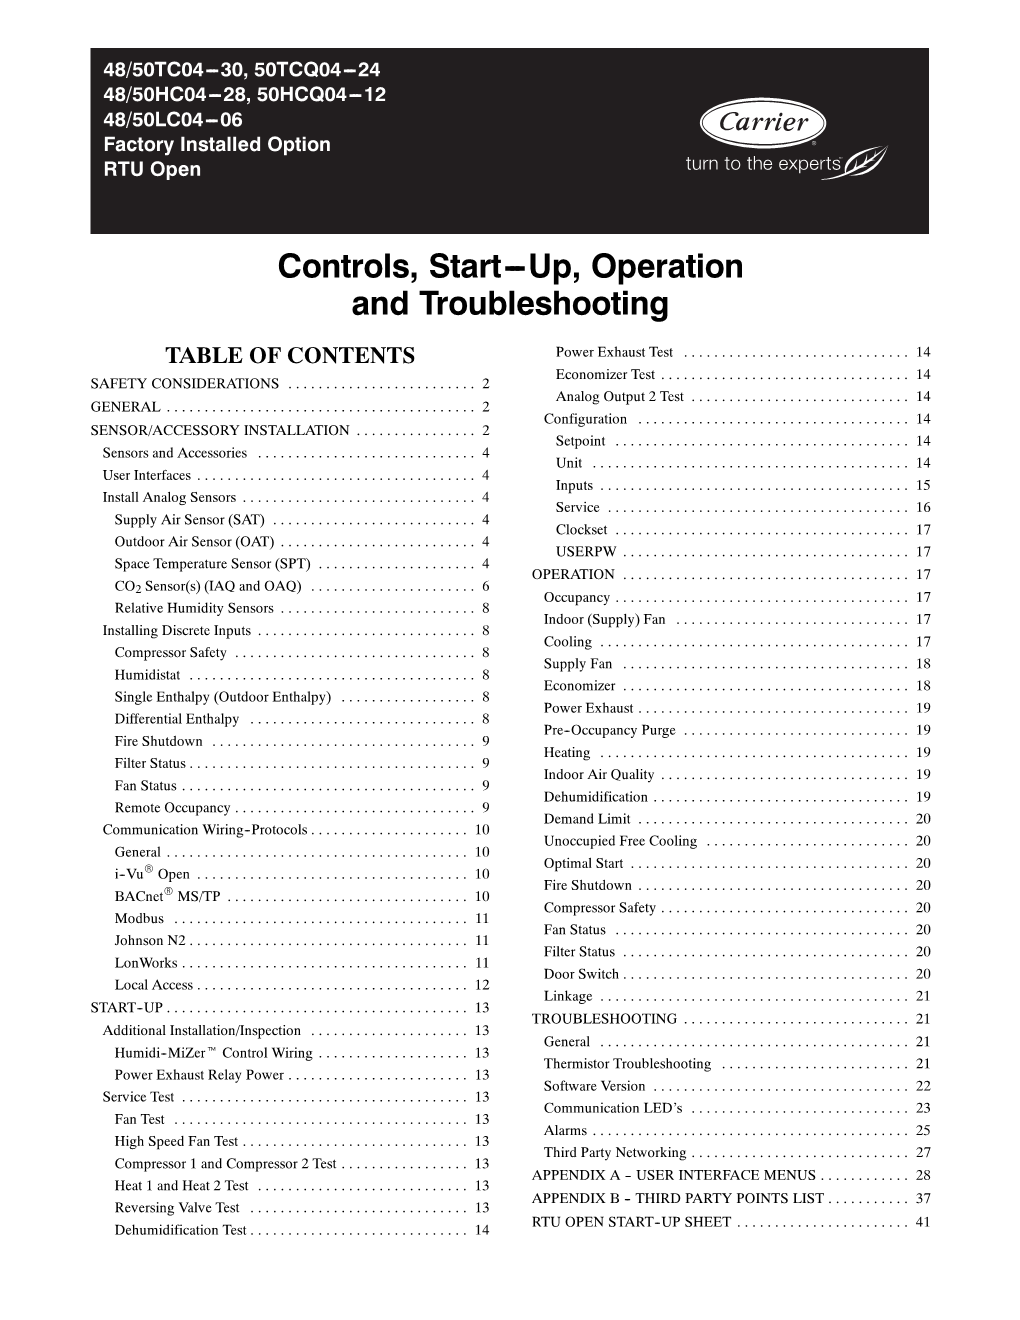 Controls, Start---Up, Operation and Troubleshooting TABLE of CONTENTS Power Exhaust Test